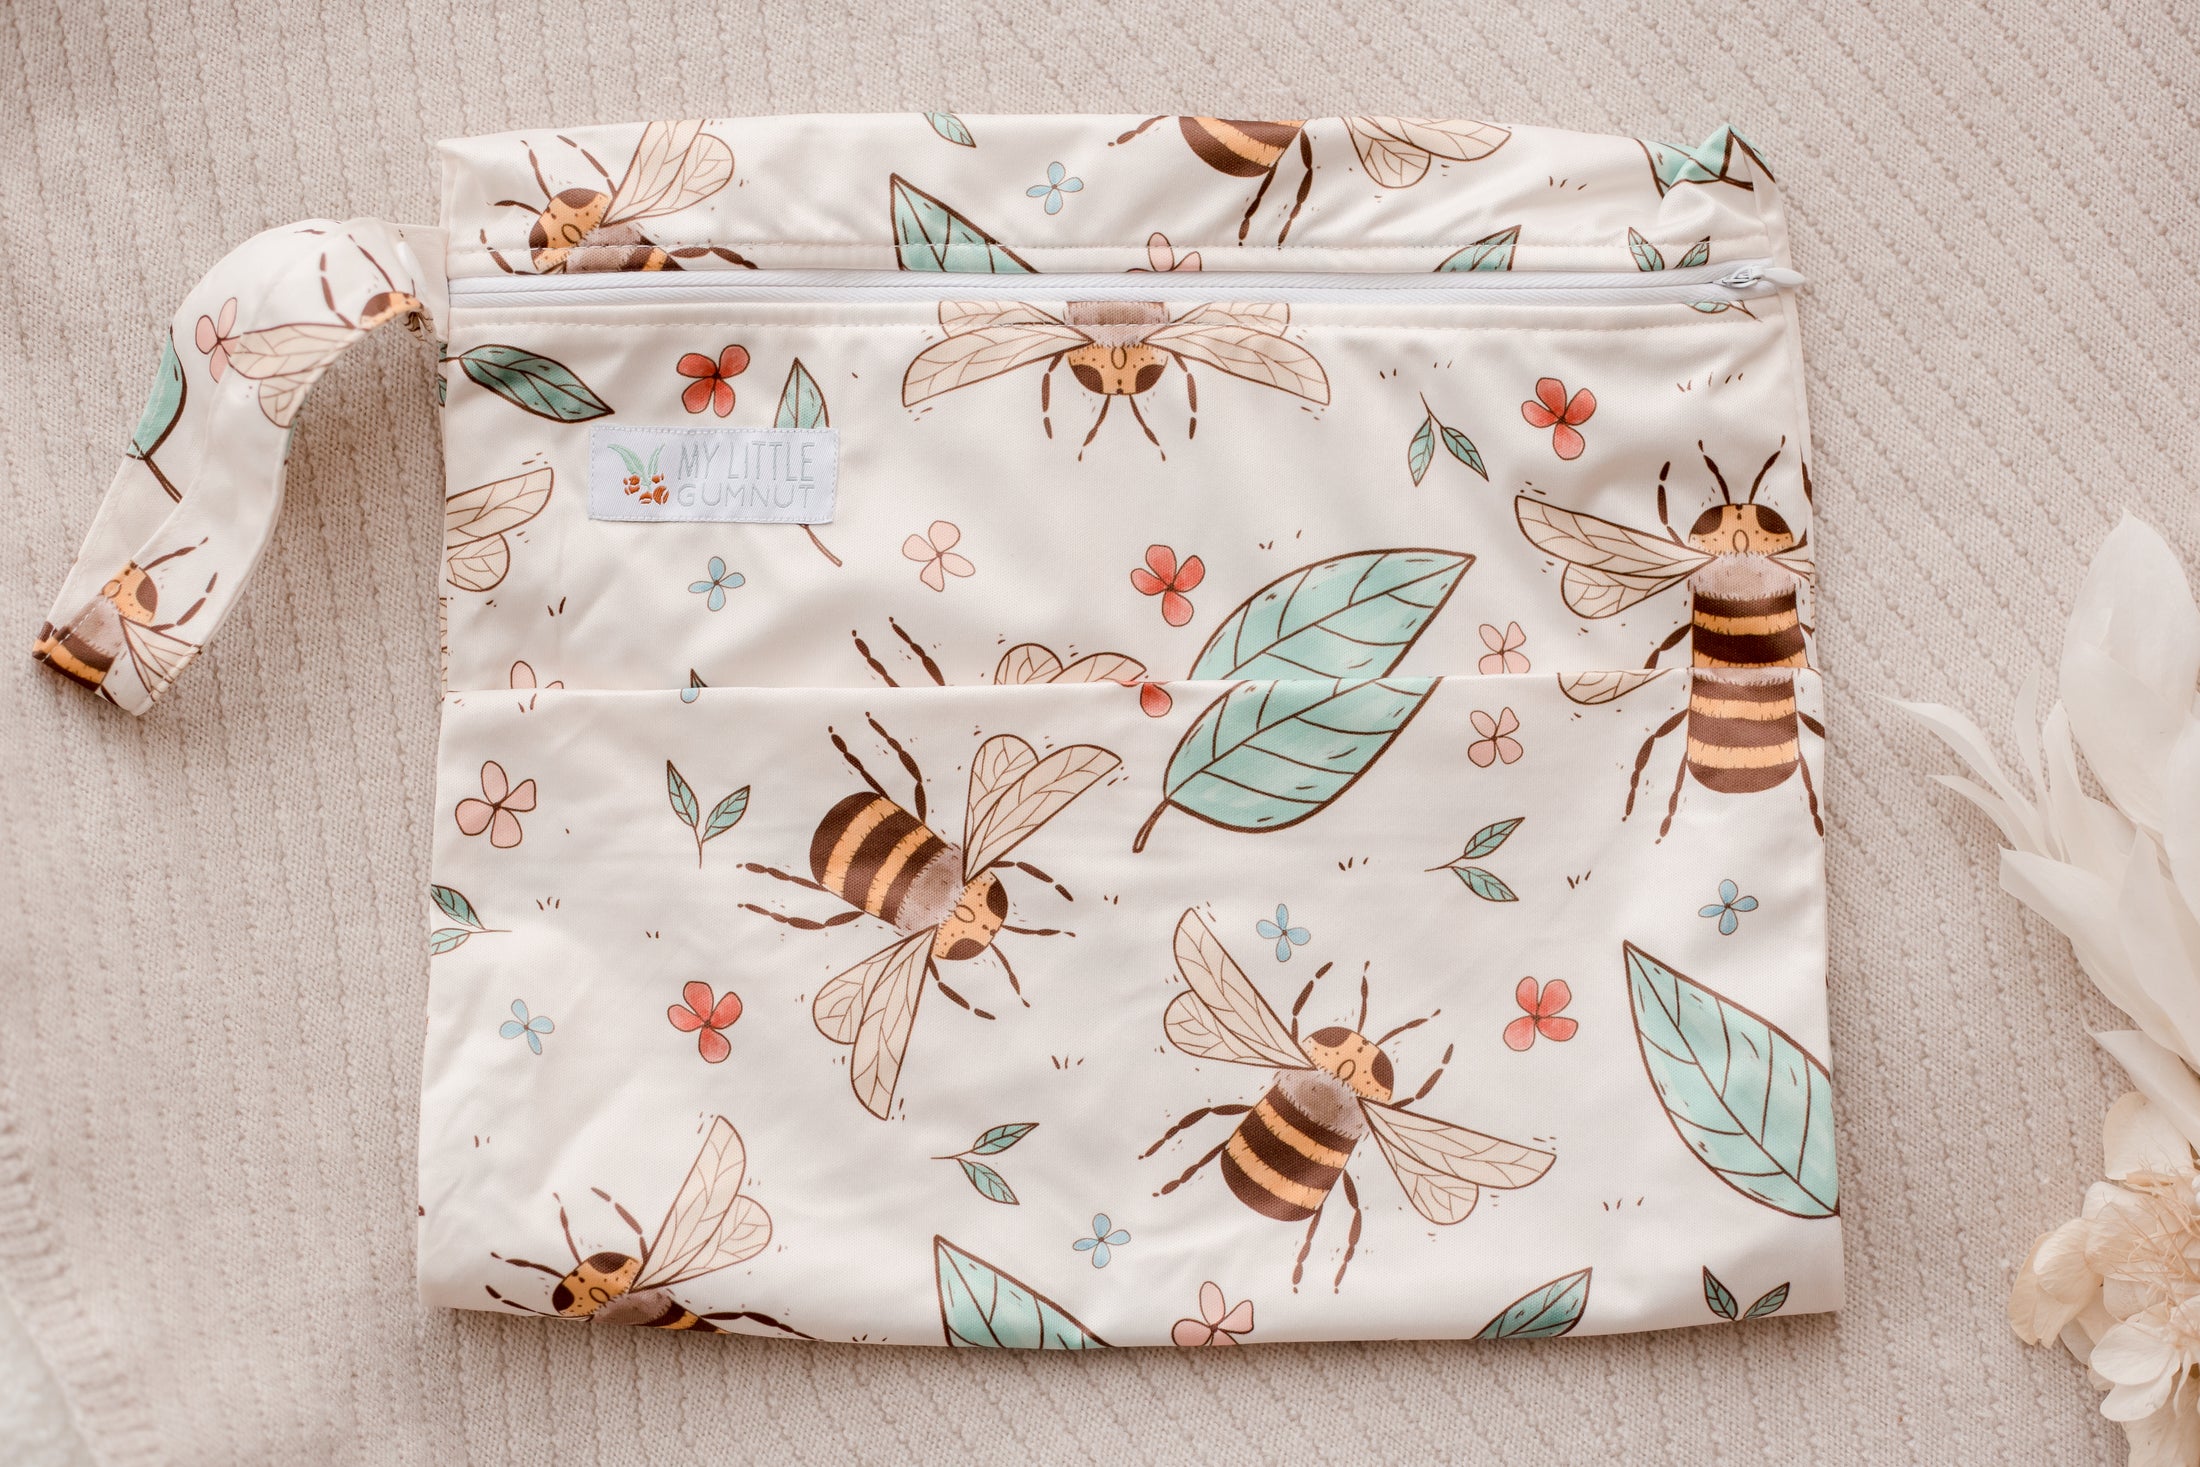 large wet bag. nappy bag. double gusset cloth nappies by my little gumnut. reusable nappy australia. cloth nappies australia. eco friendly nappies. bee nappy.